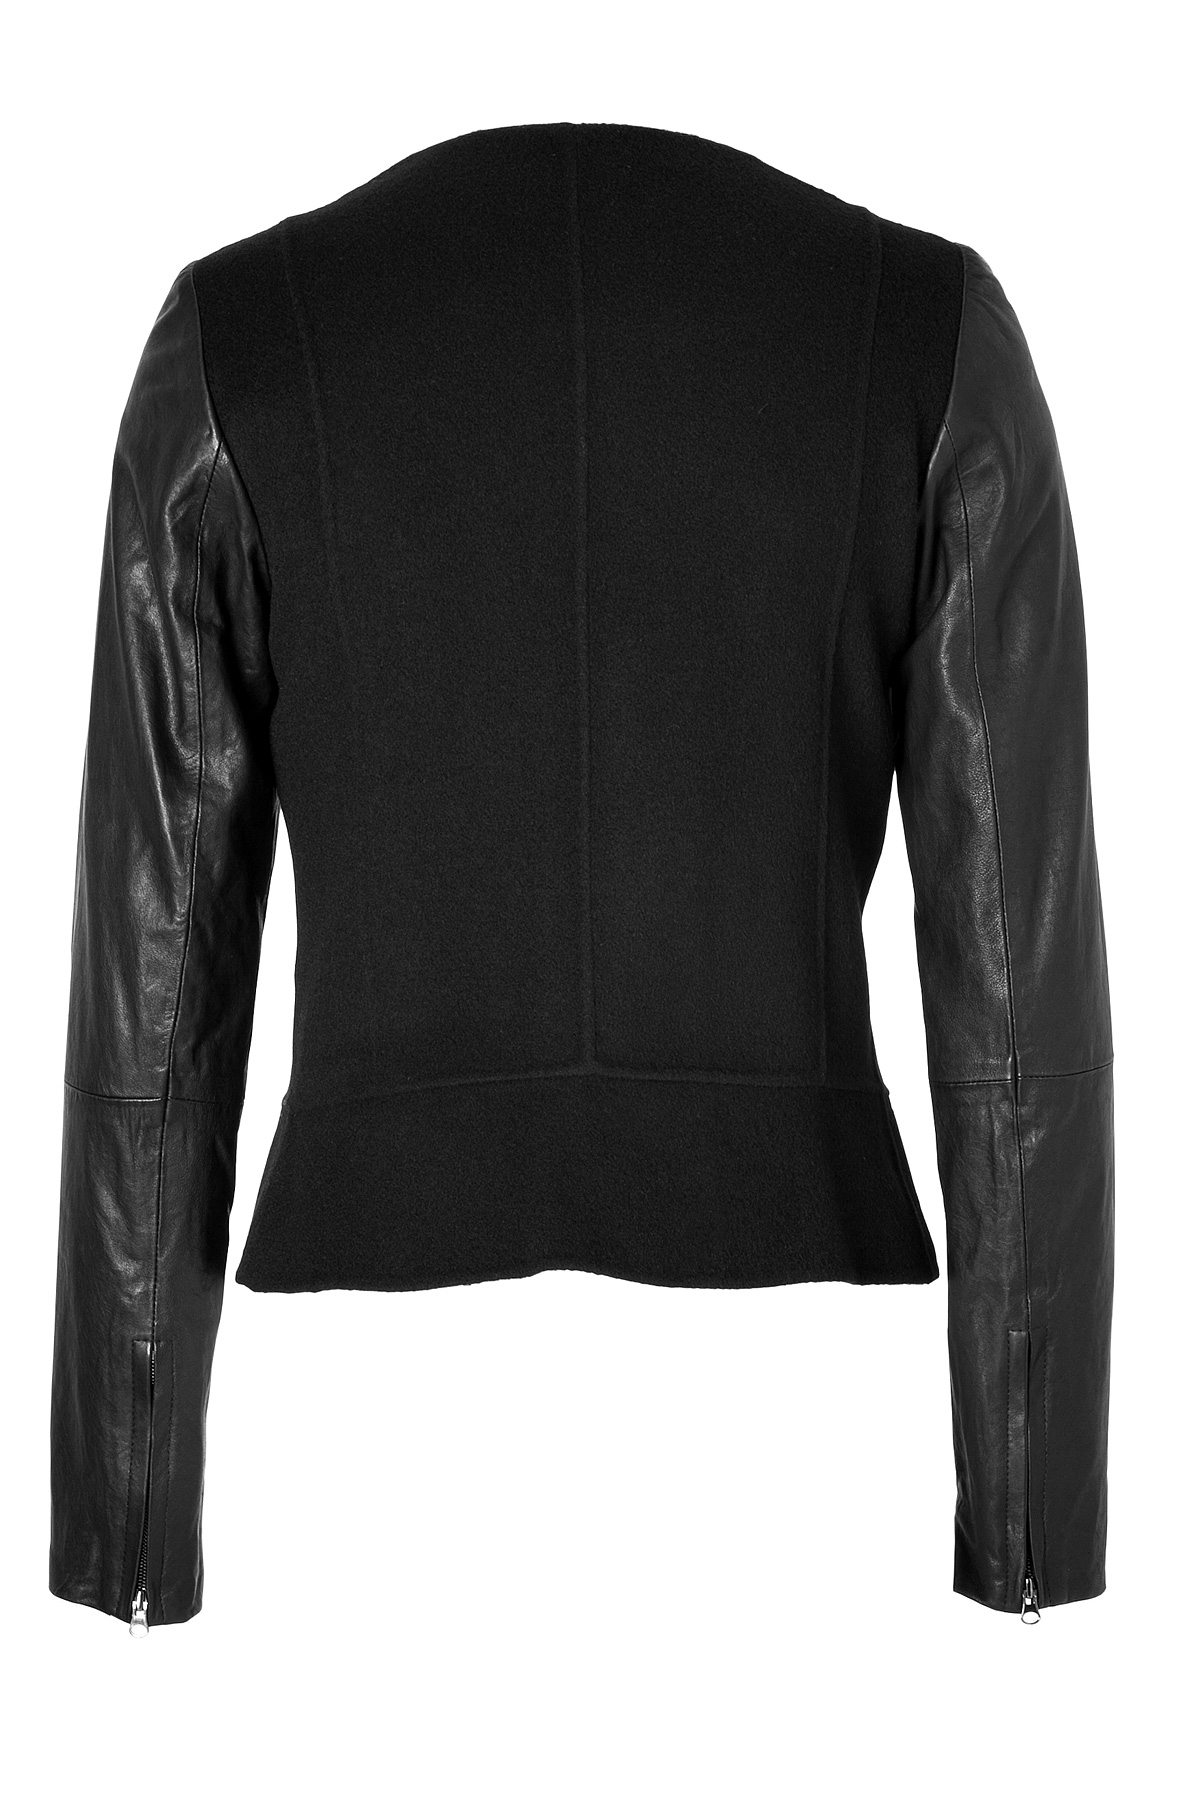 Lyst - Vince Wool Jacket With Leather Sleeves In Black in Black